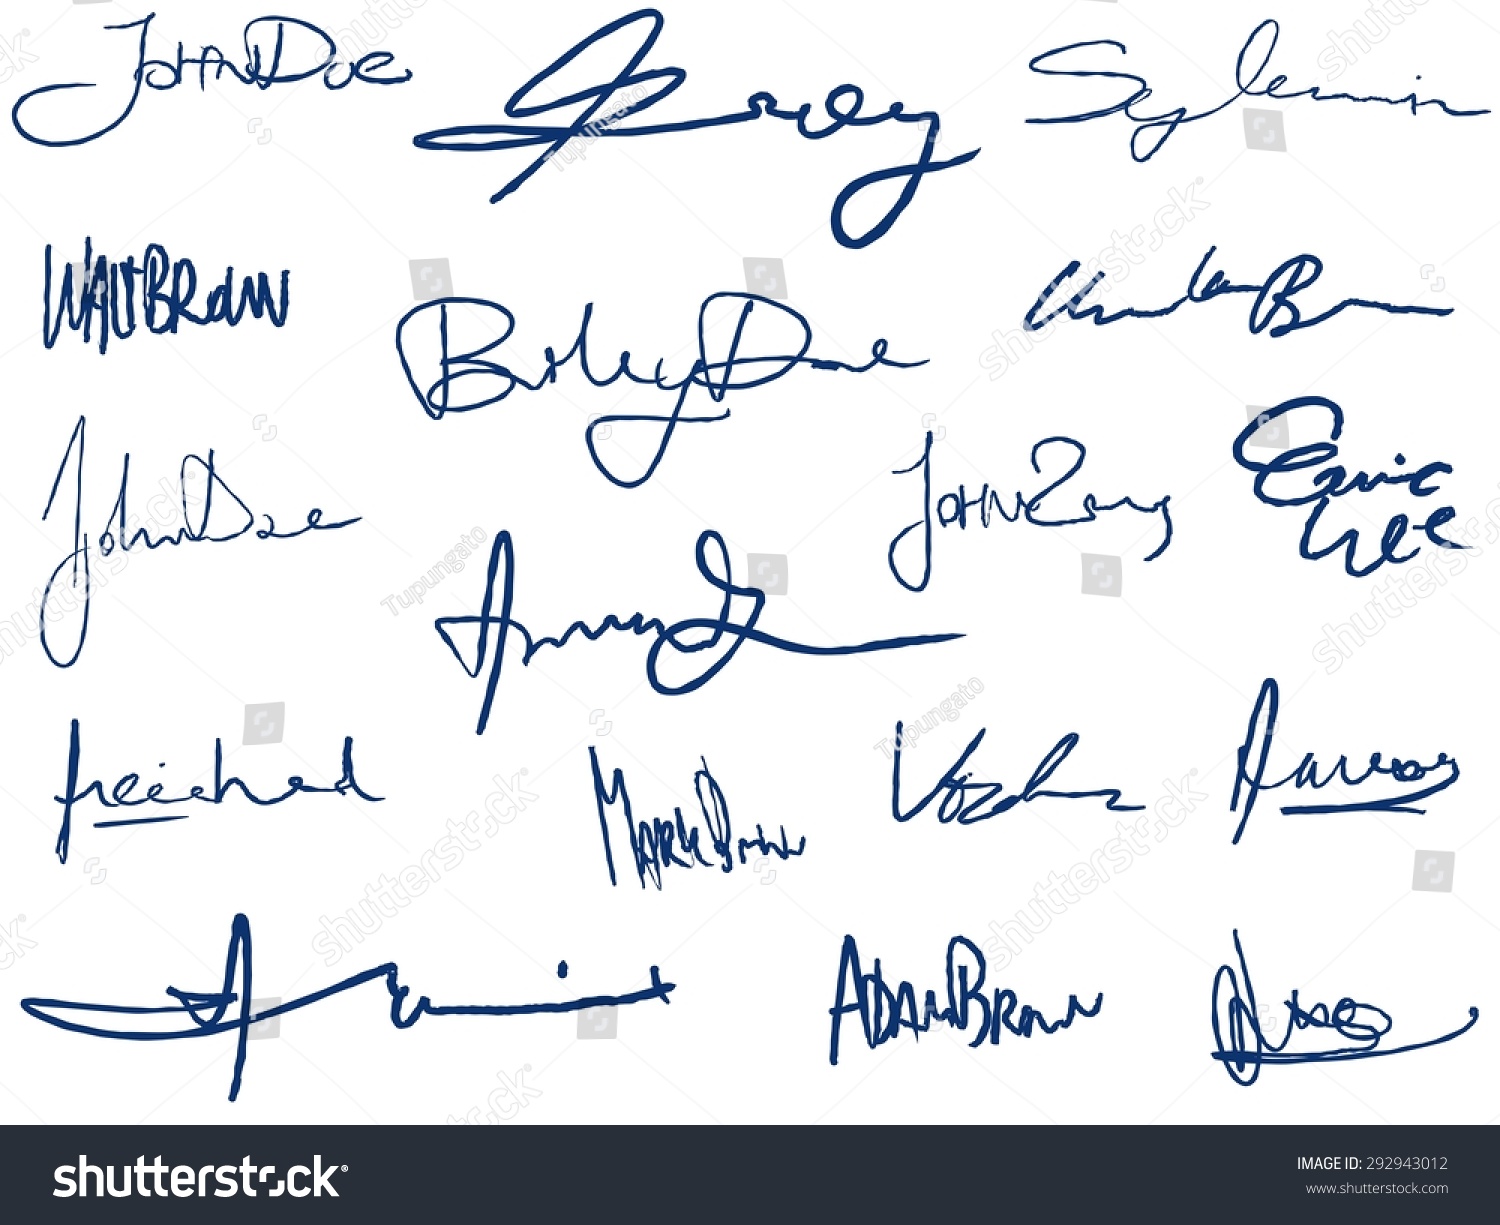 stock-vector-collection-of-handwritten-signatures-personal-contract-fictitious-signature-set-292943012.jpg